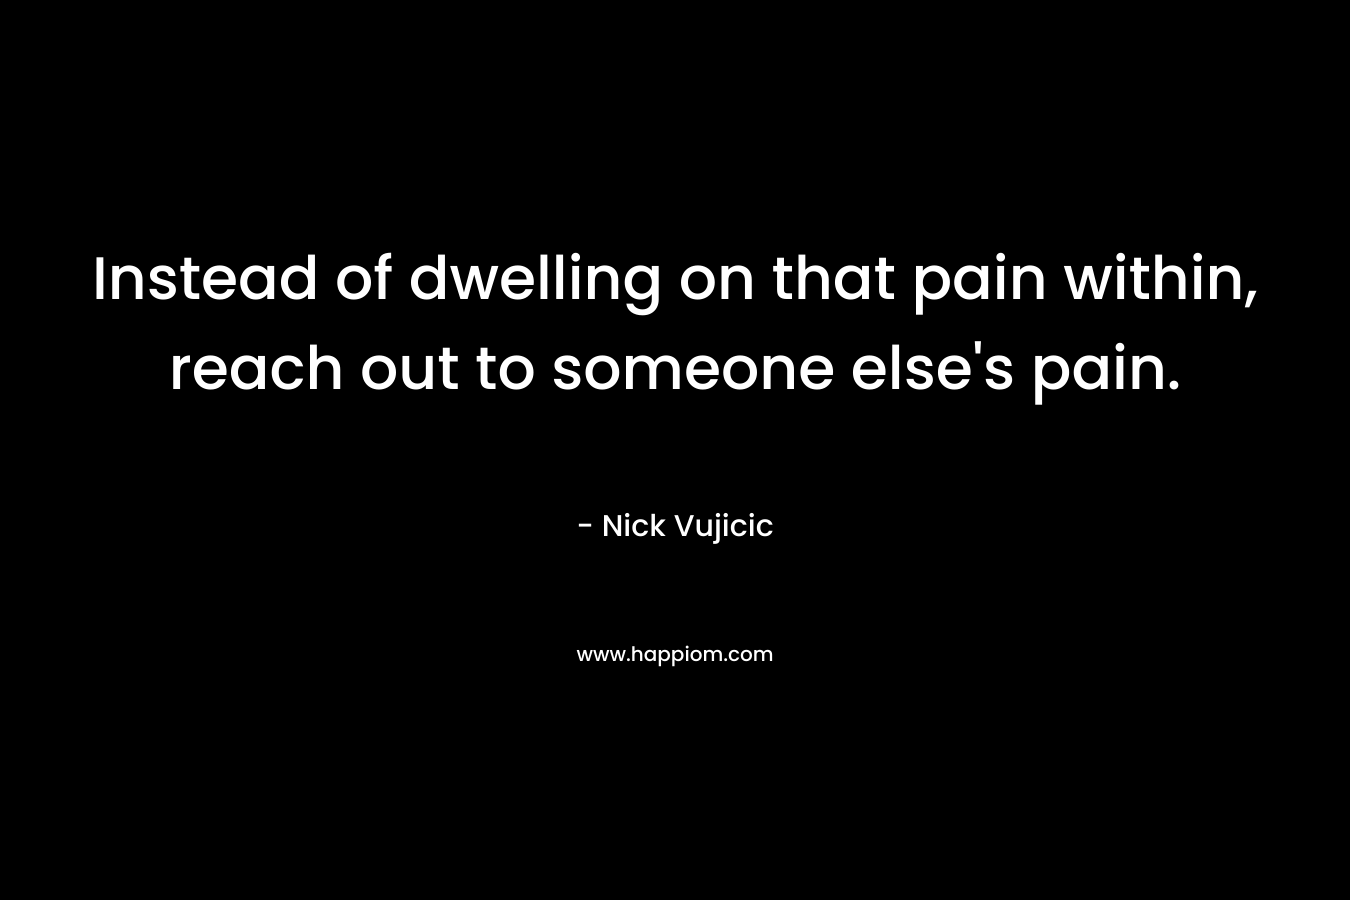 Instead of dwelling on that pain within, reach out to someone else’s pain. – Nick Vujicic